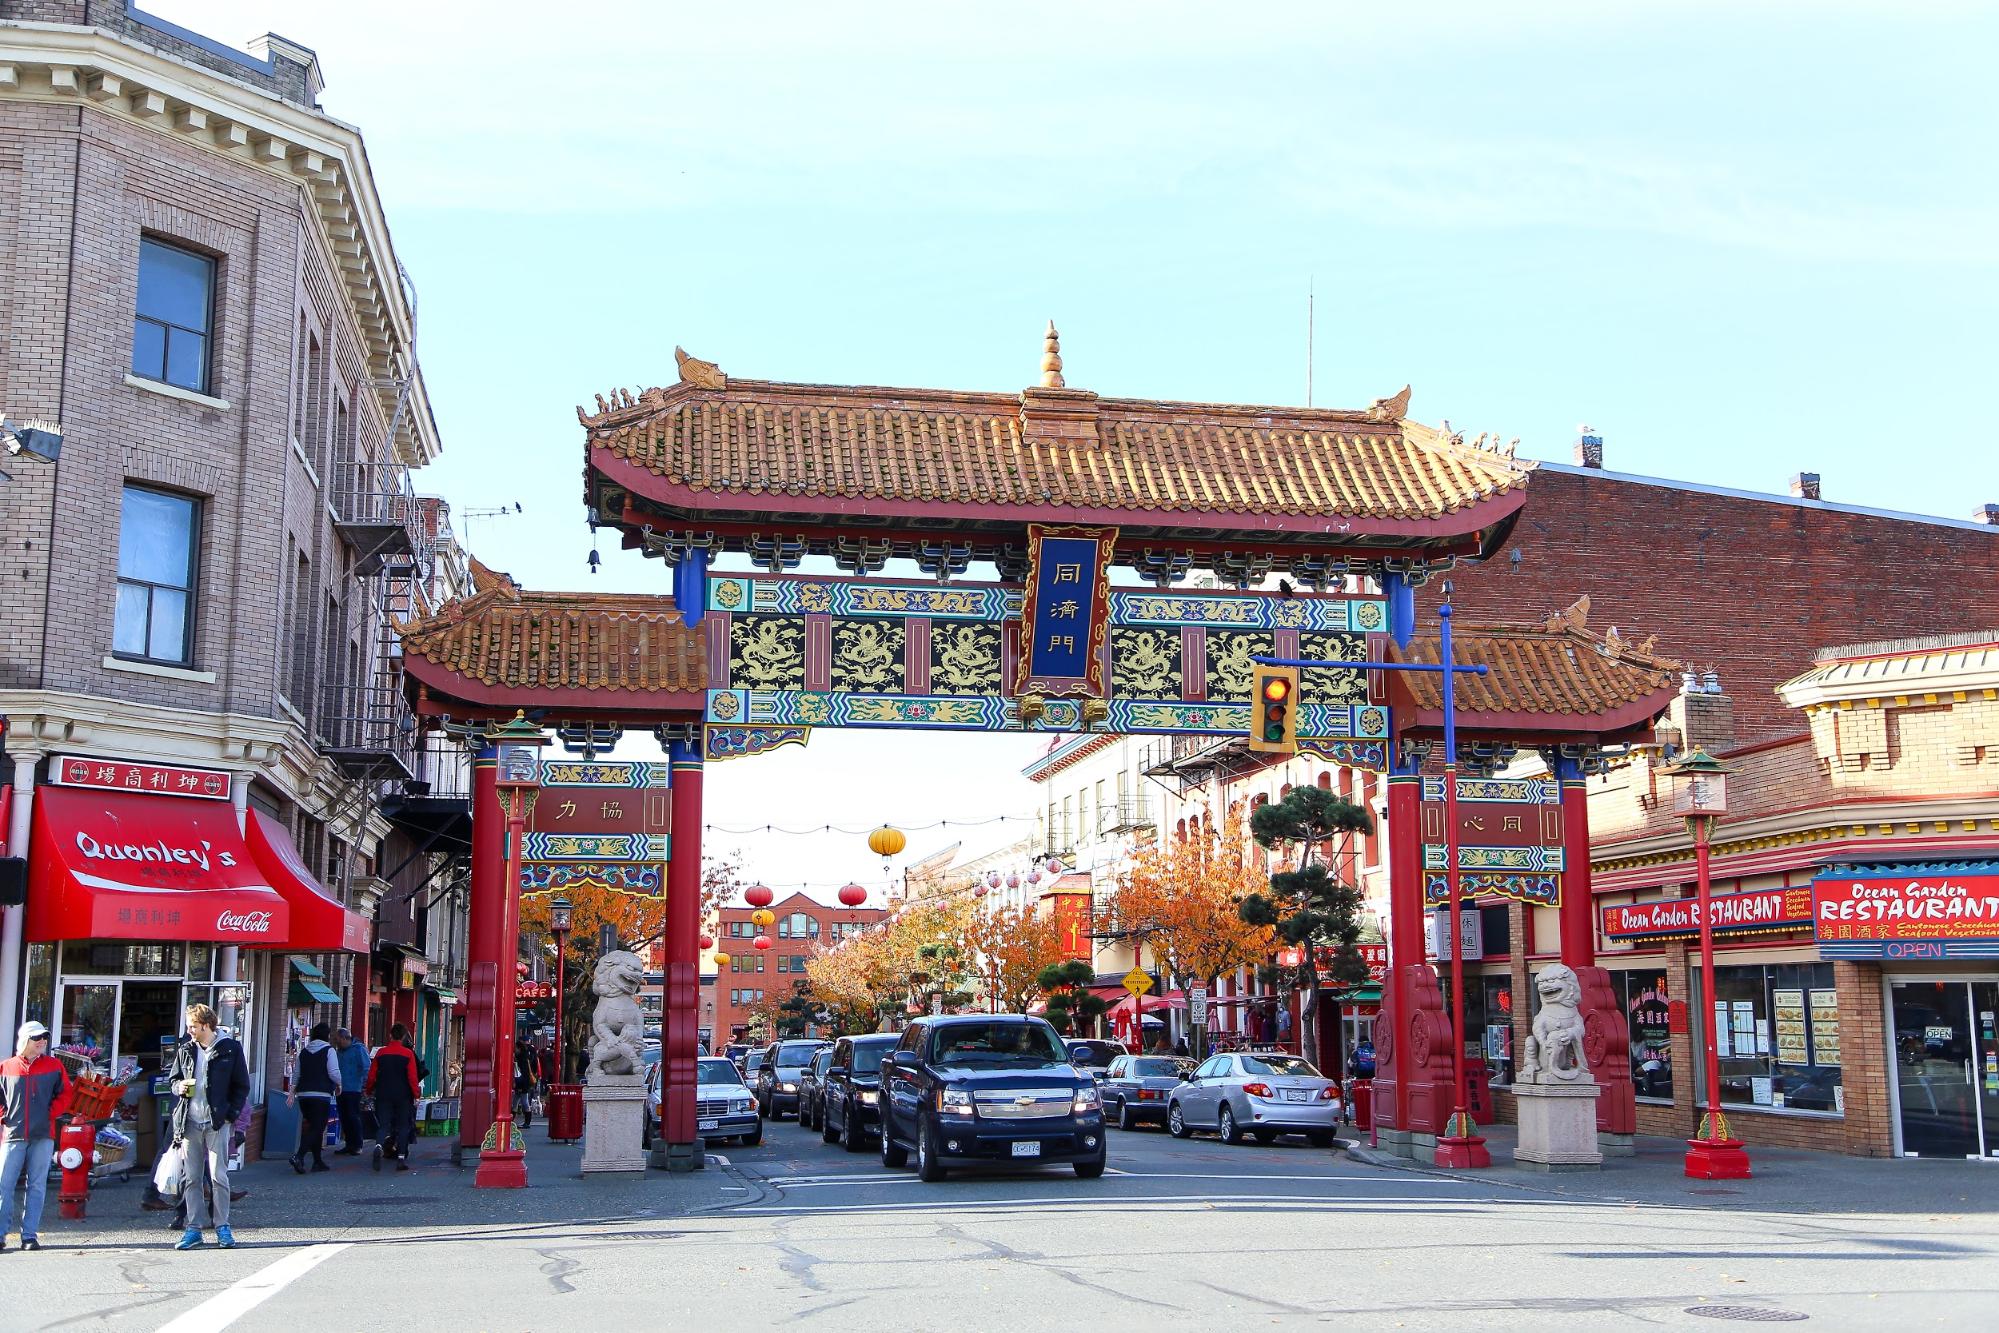 An intricately designed entrance on a city street to Chinatown in Victoria, BC.